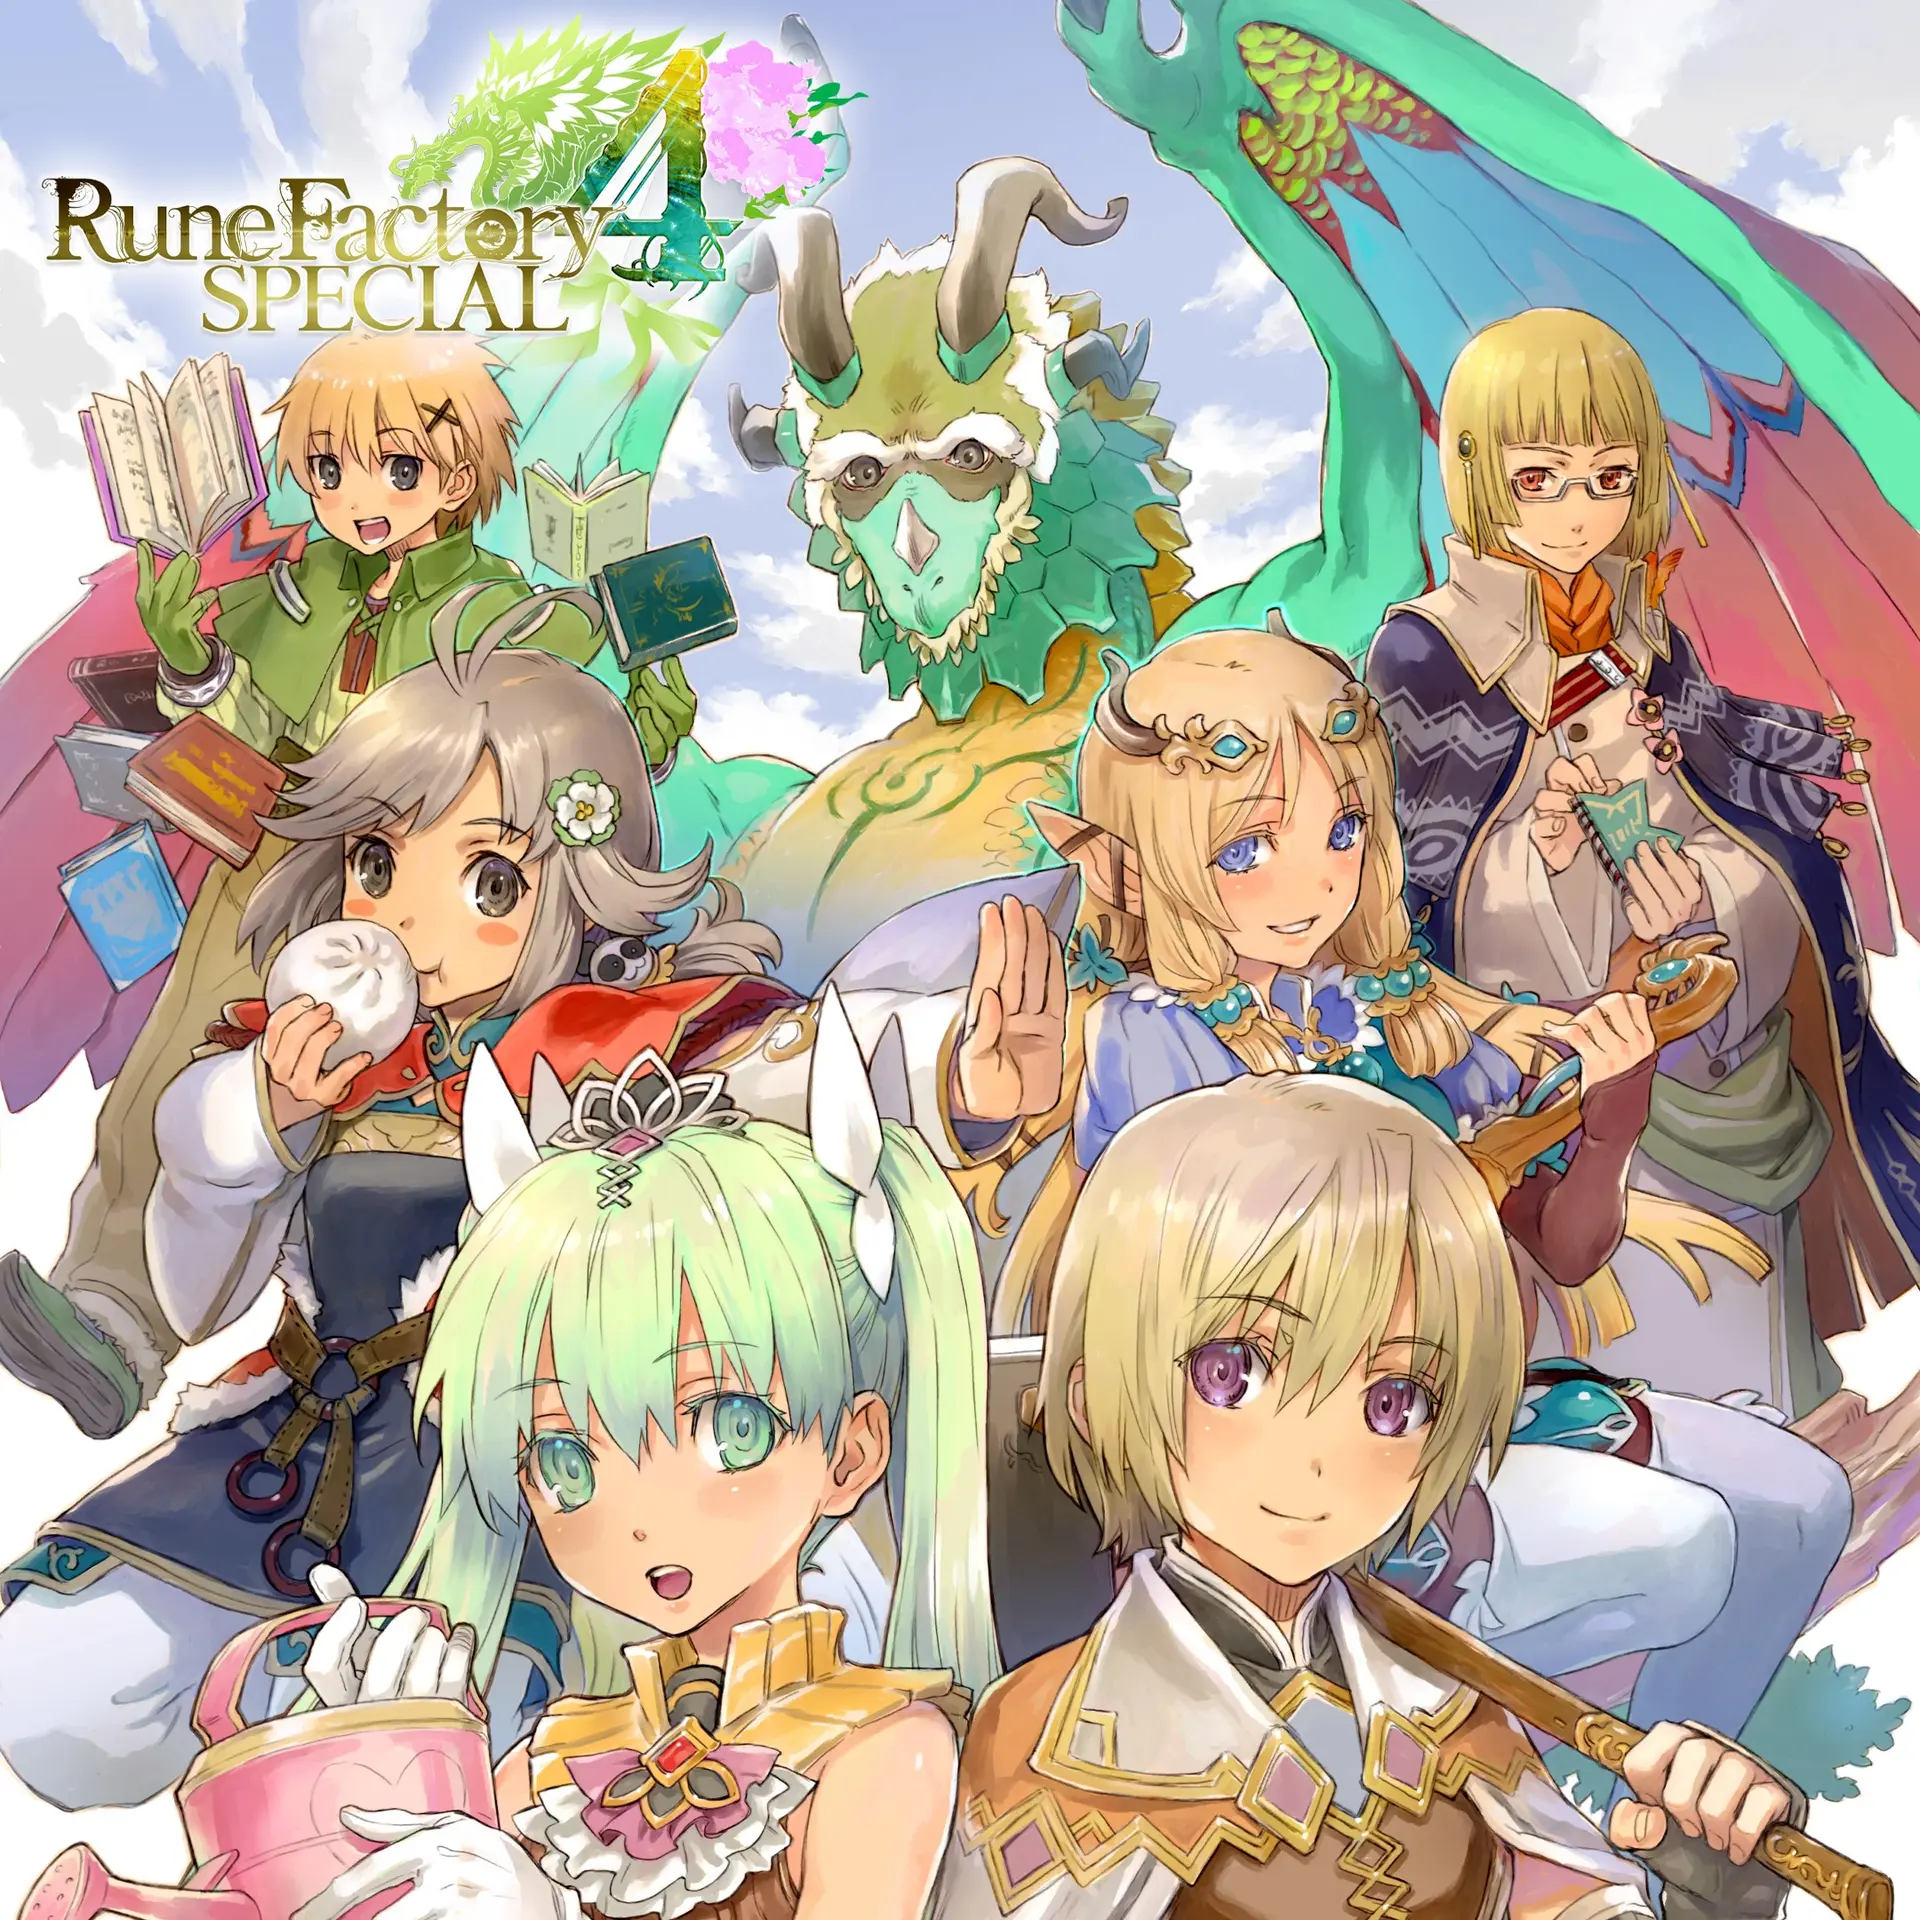 Rune Factory 4 Special (XBOX One - Cheapest Store)